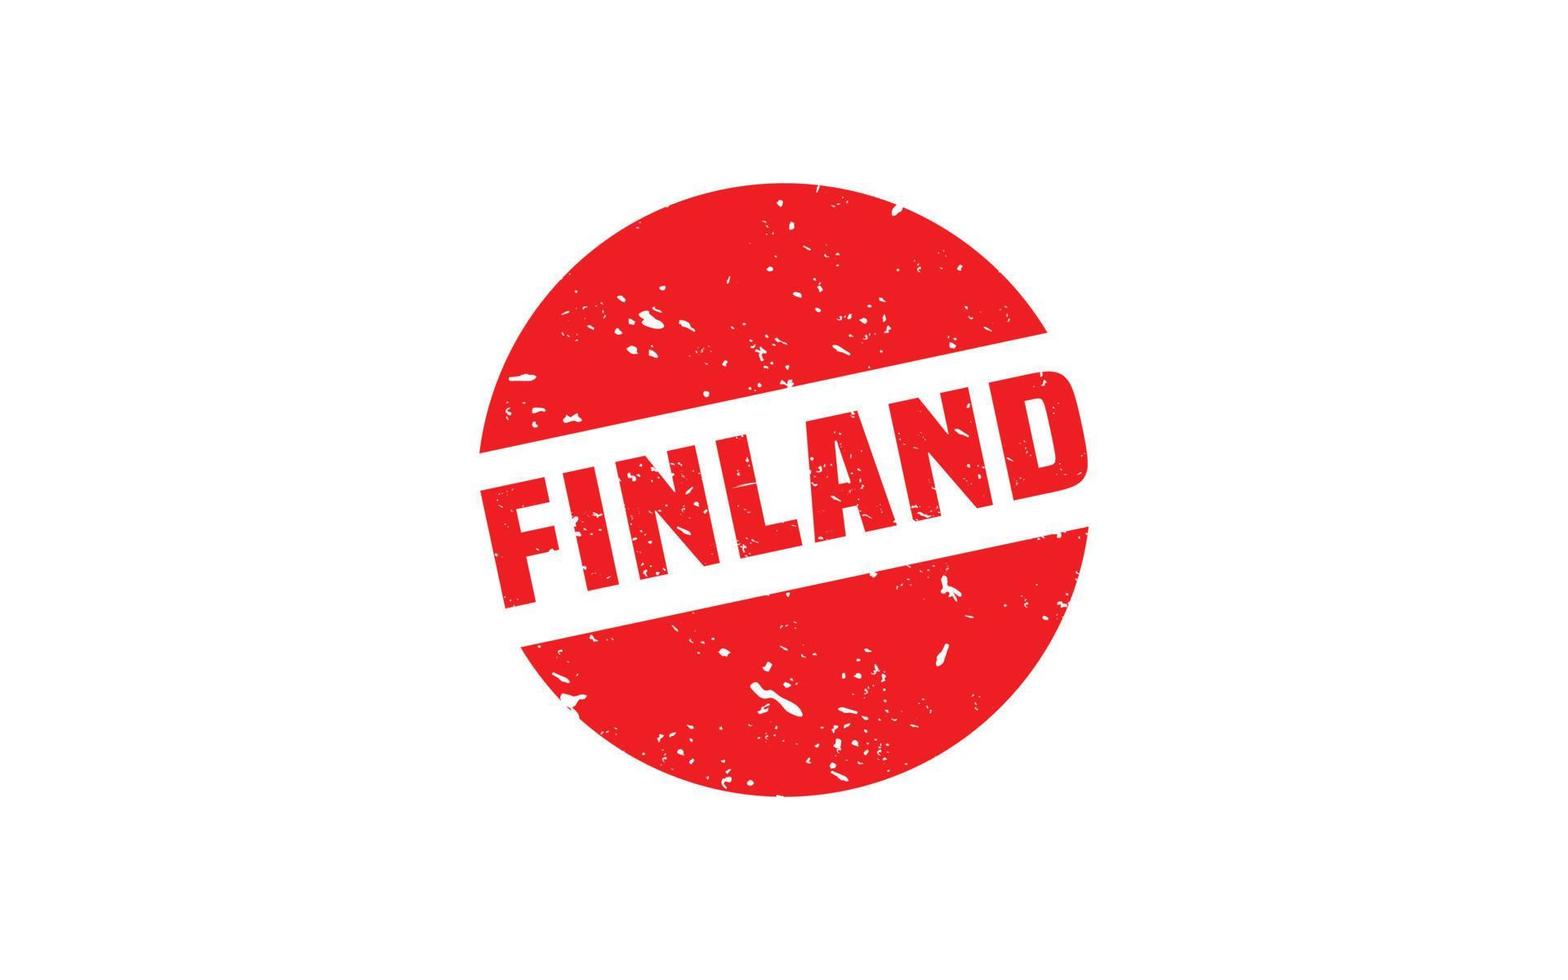 FINLAND stamp rubber with grunge style on white background vector